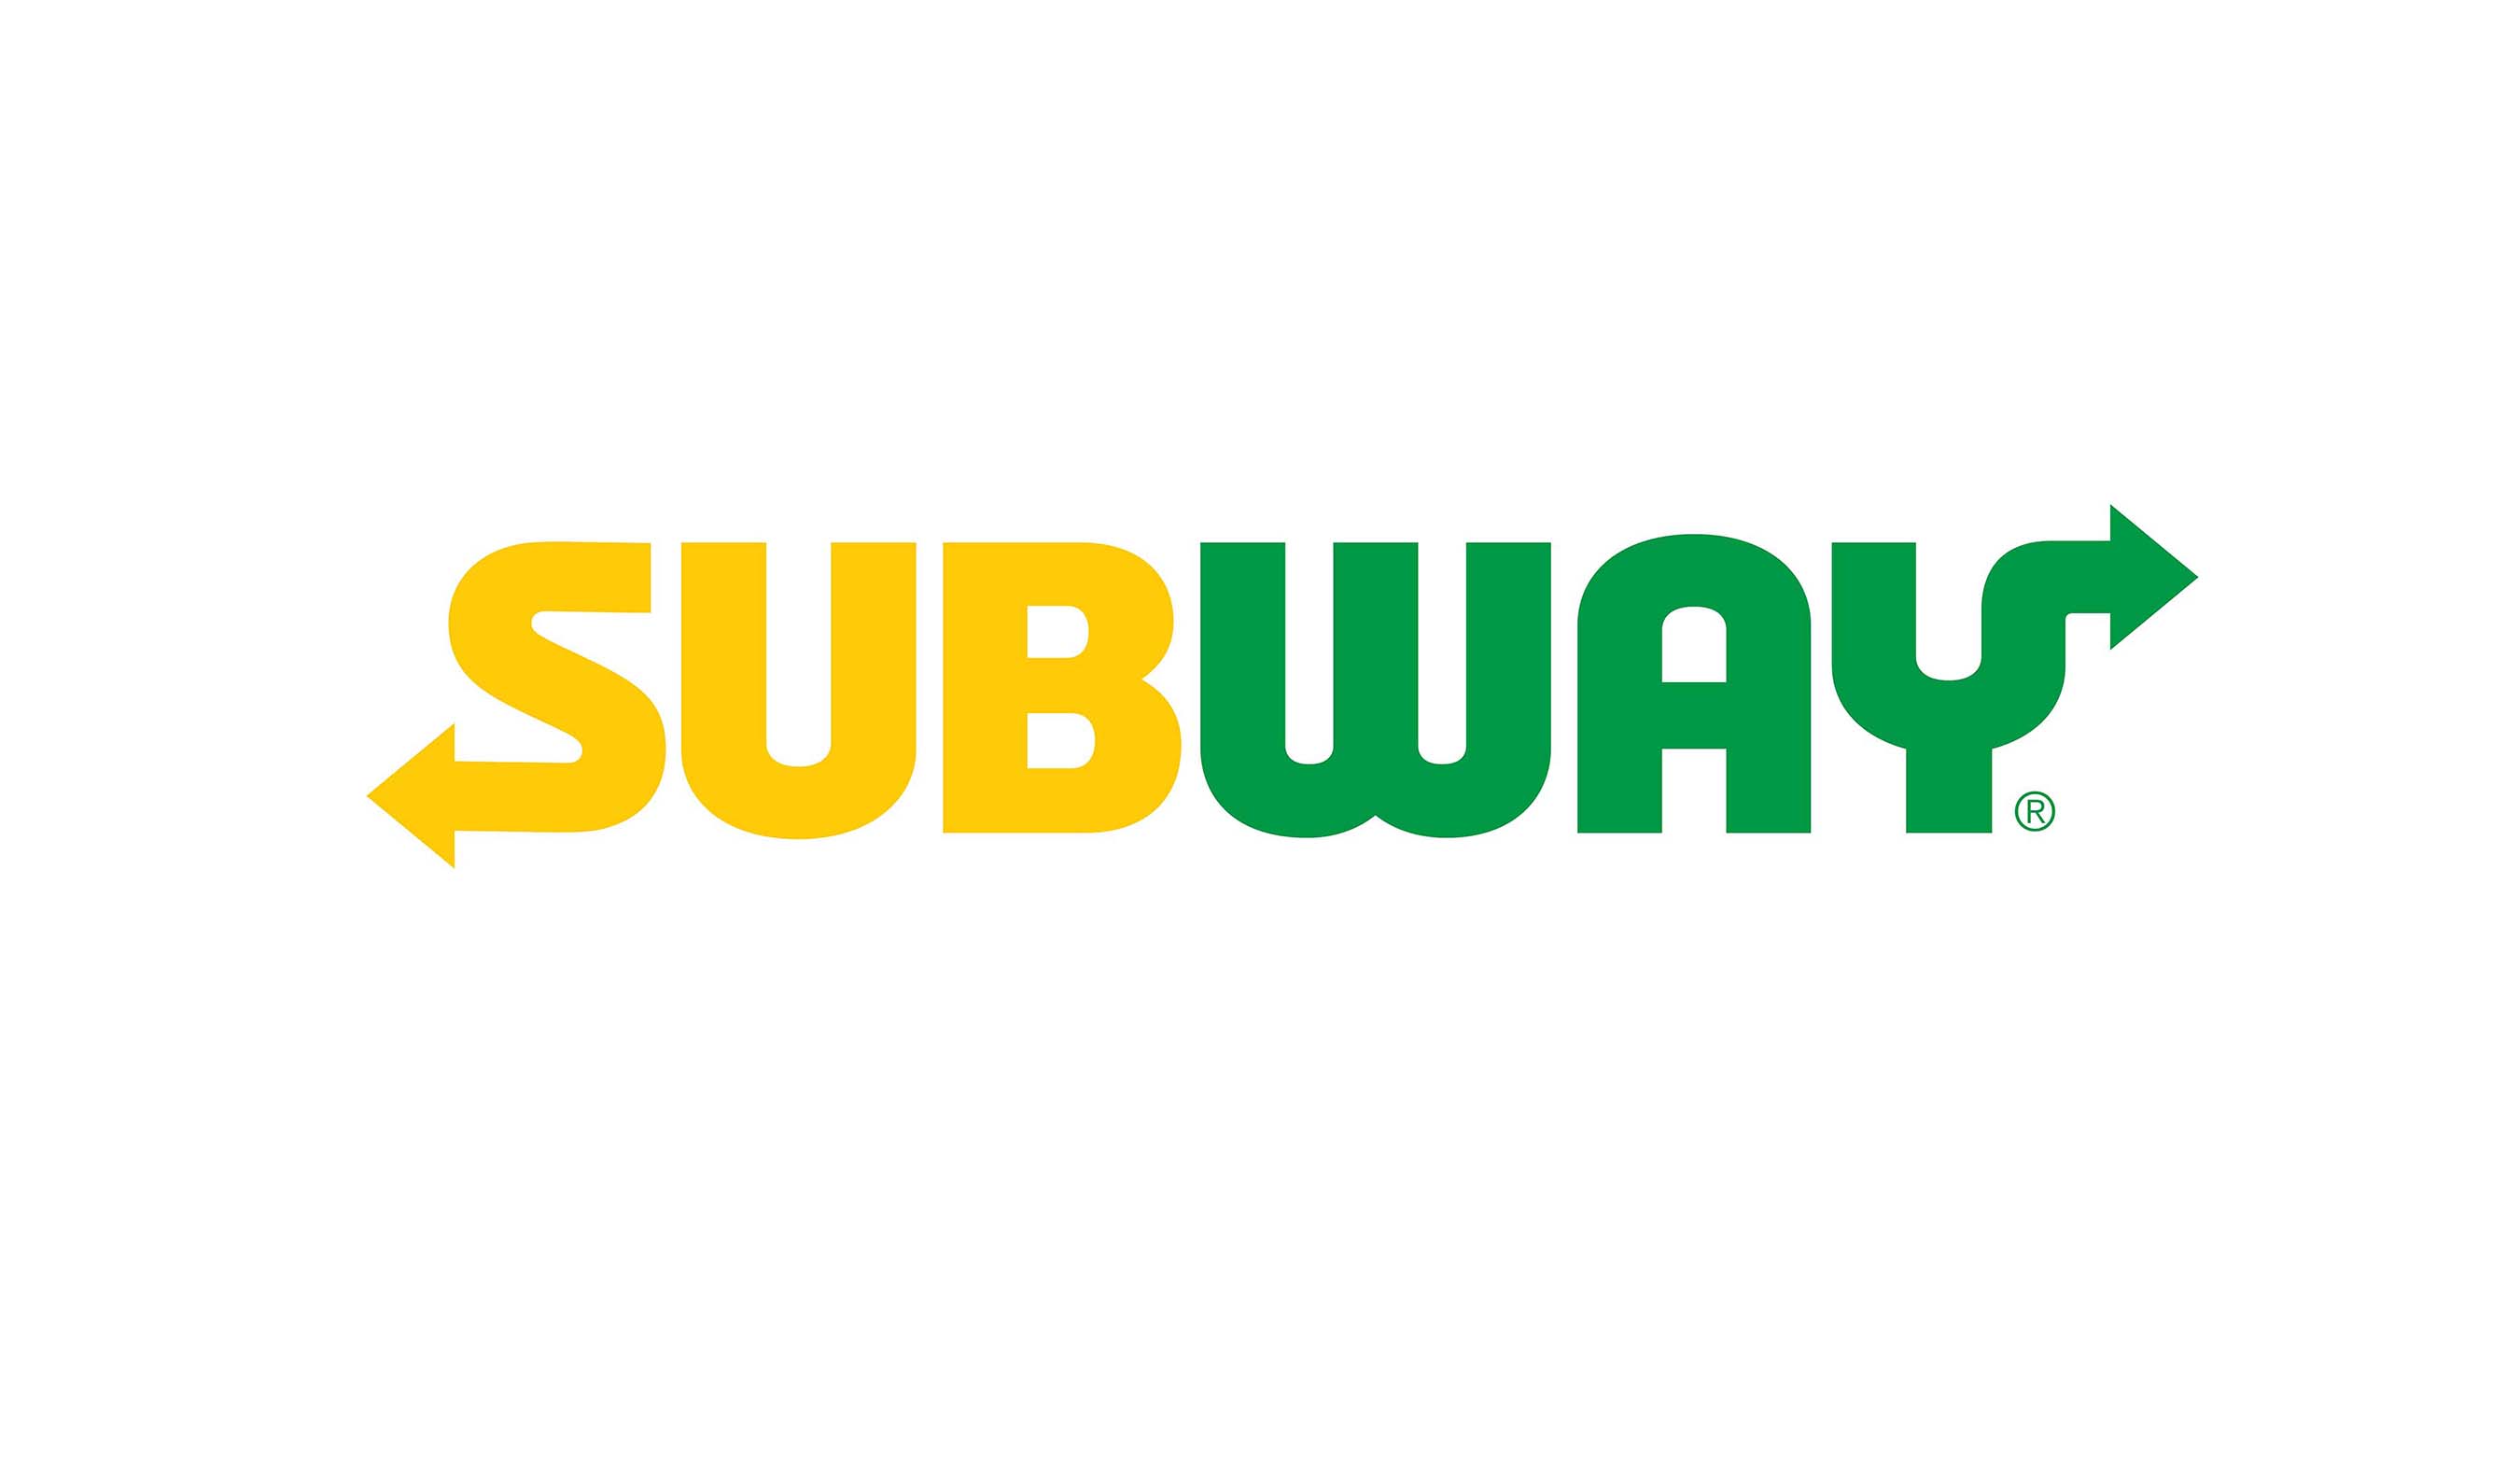 Subway Franchise for Sale in Fayetteville Area earning $77,000 for Owner